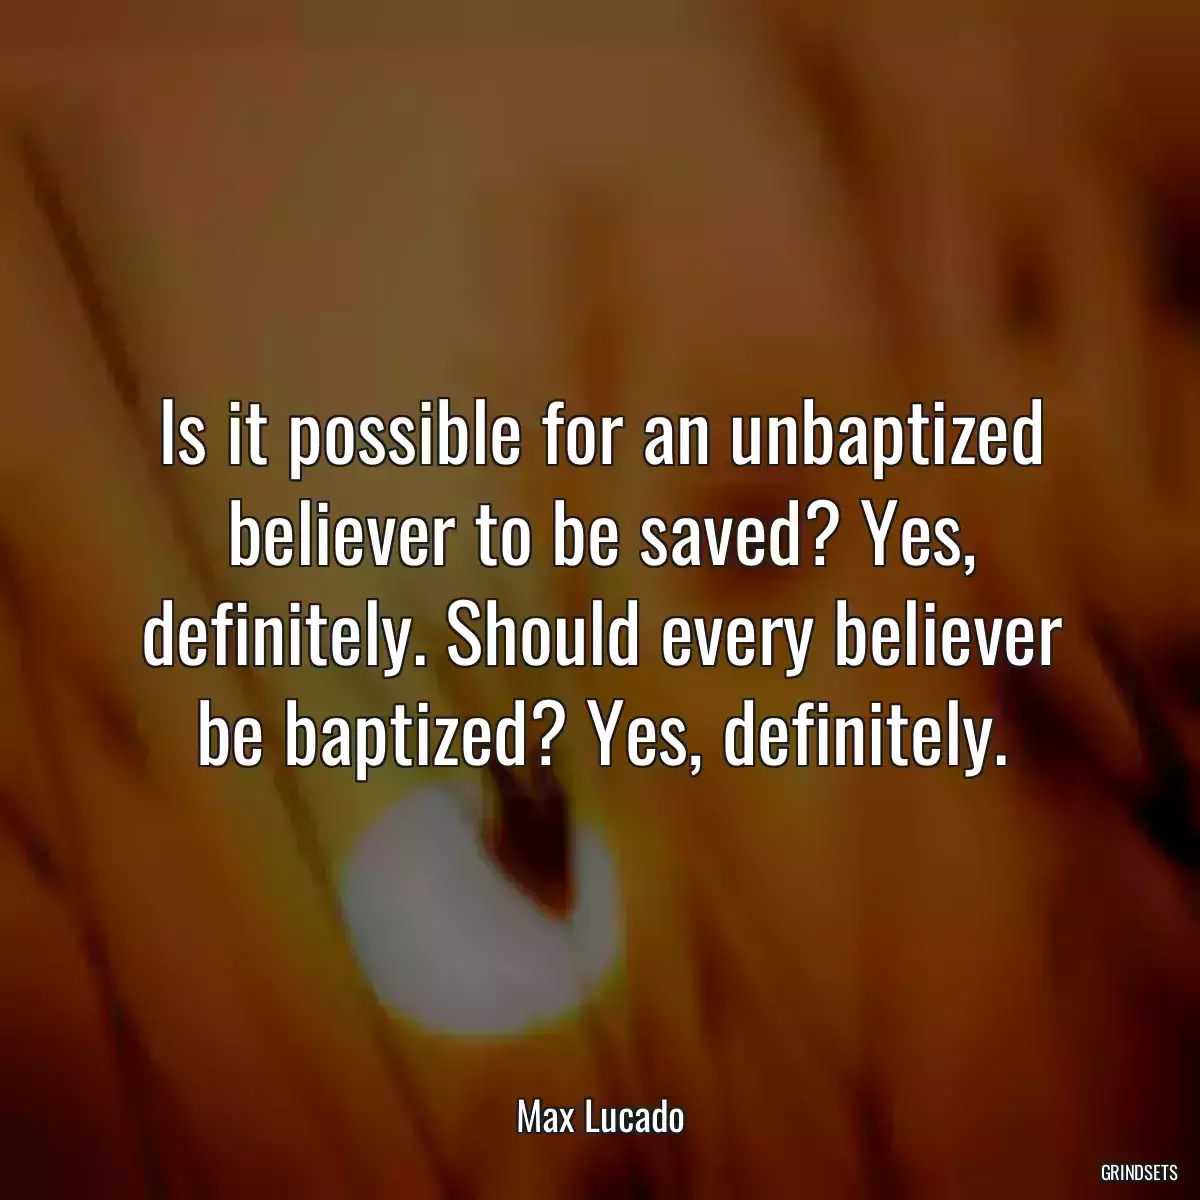 Is it possible for an unbaptized believer to be saved? Yes, definitely. Should every believer be baptized? Yes, definitely.